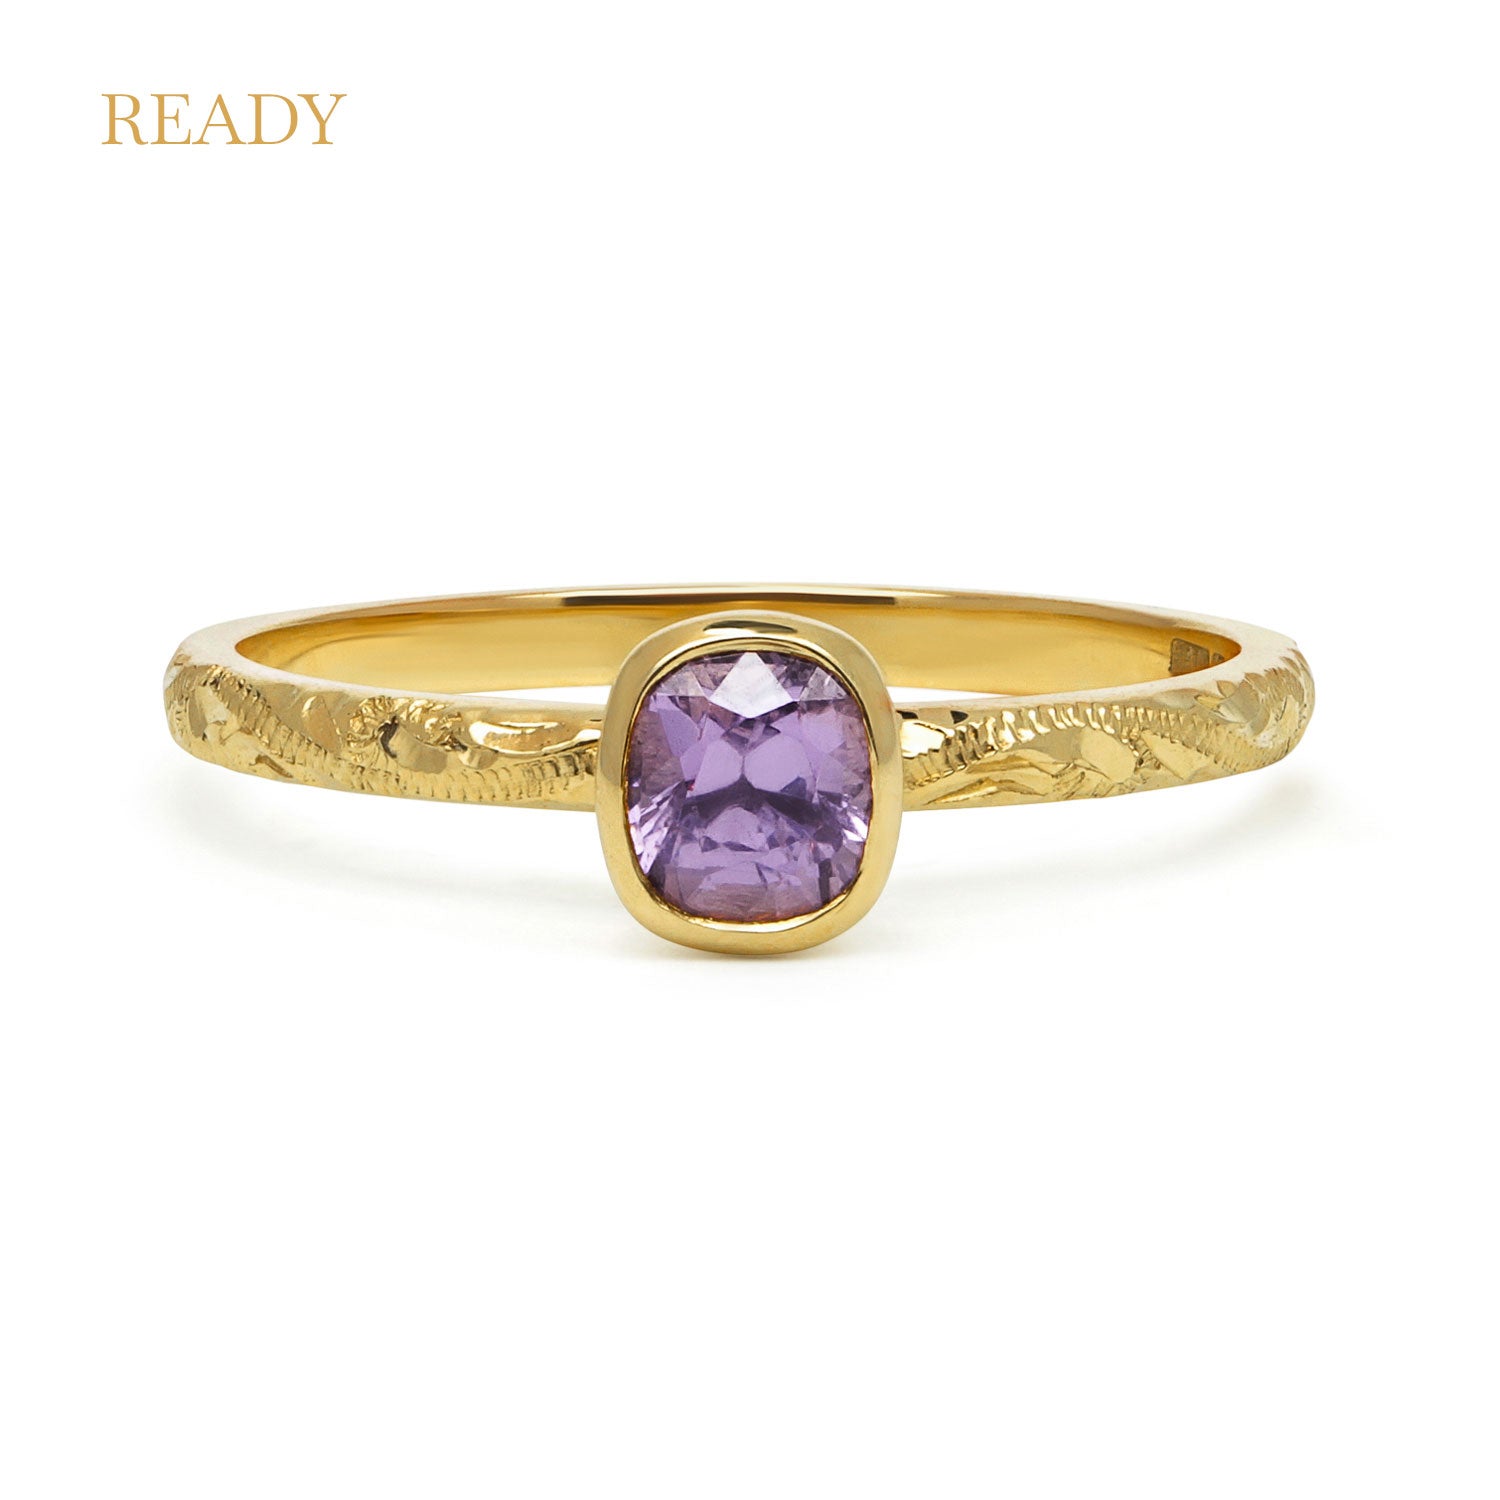 Fancy Hera ethical solitaire engagement ring in 18ct recycled yellow gold, hand-engraved and set with a purple cushion-cut spinel of fair-traded and traceable Sri Lankan provenance